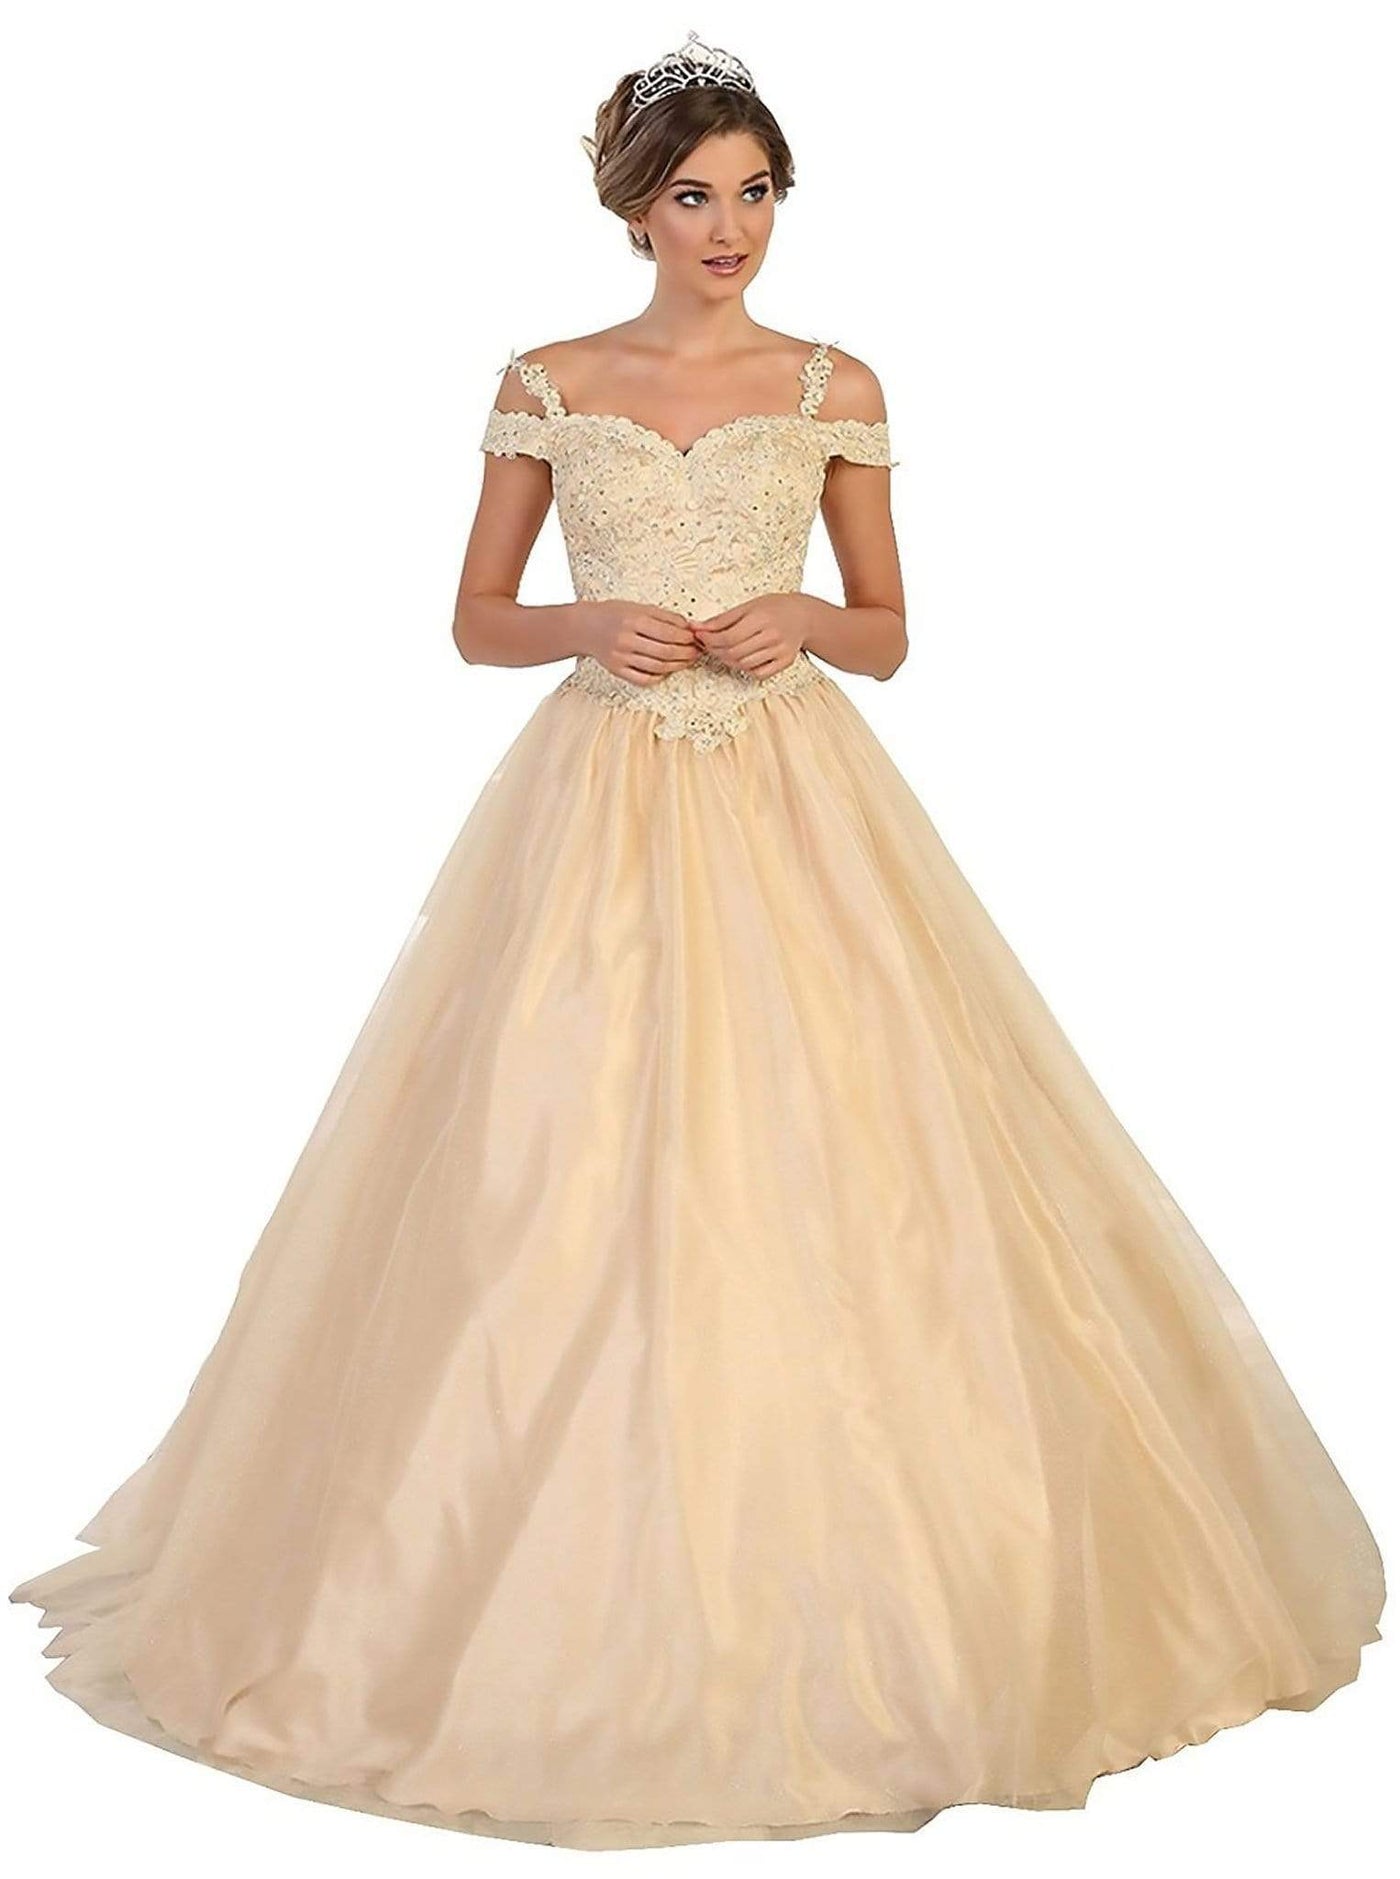 May Queen - Beaded Lace Sweetheart Quinceanera Ballgown Quinceanera Dresses 4 / Champagne